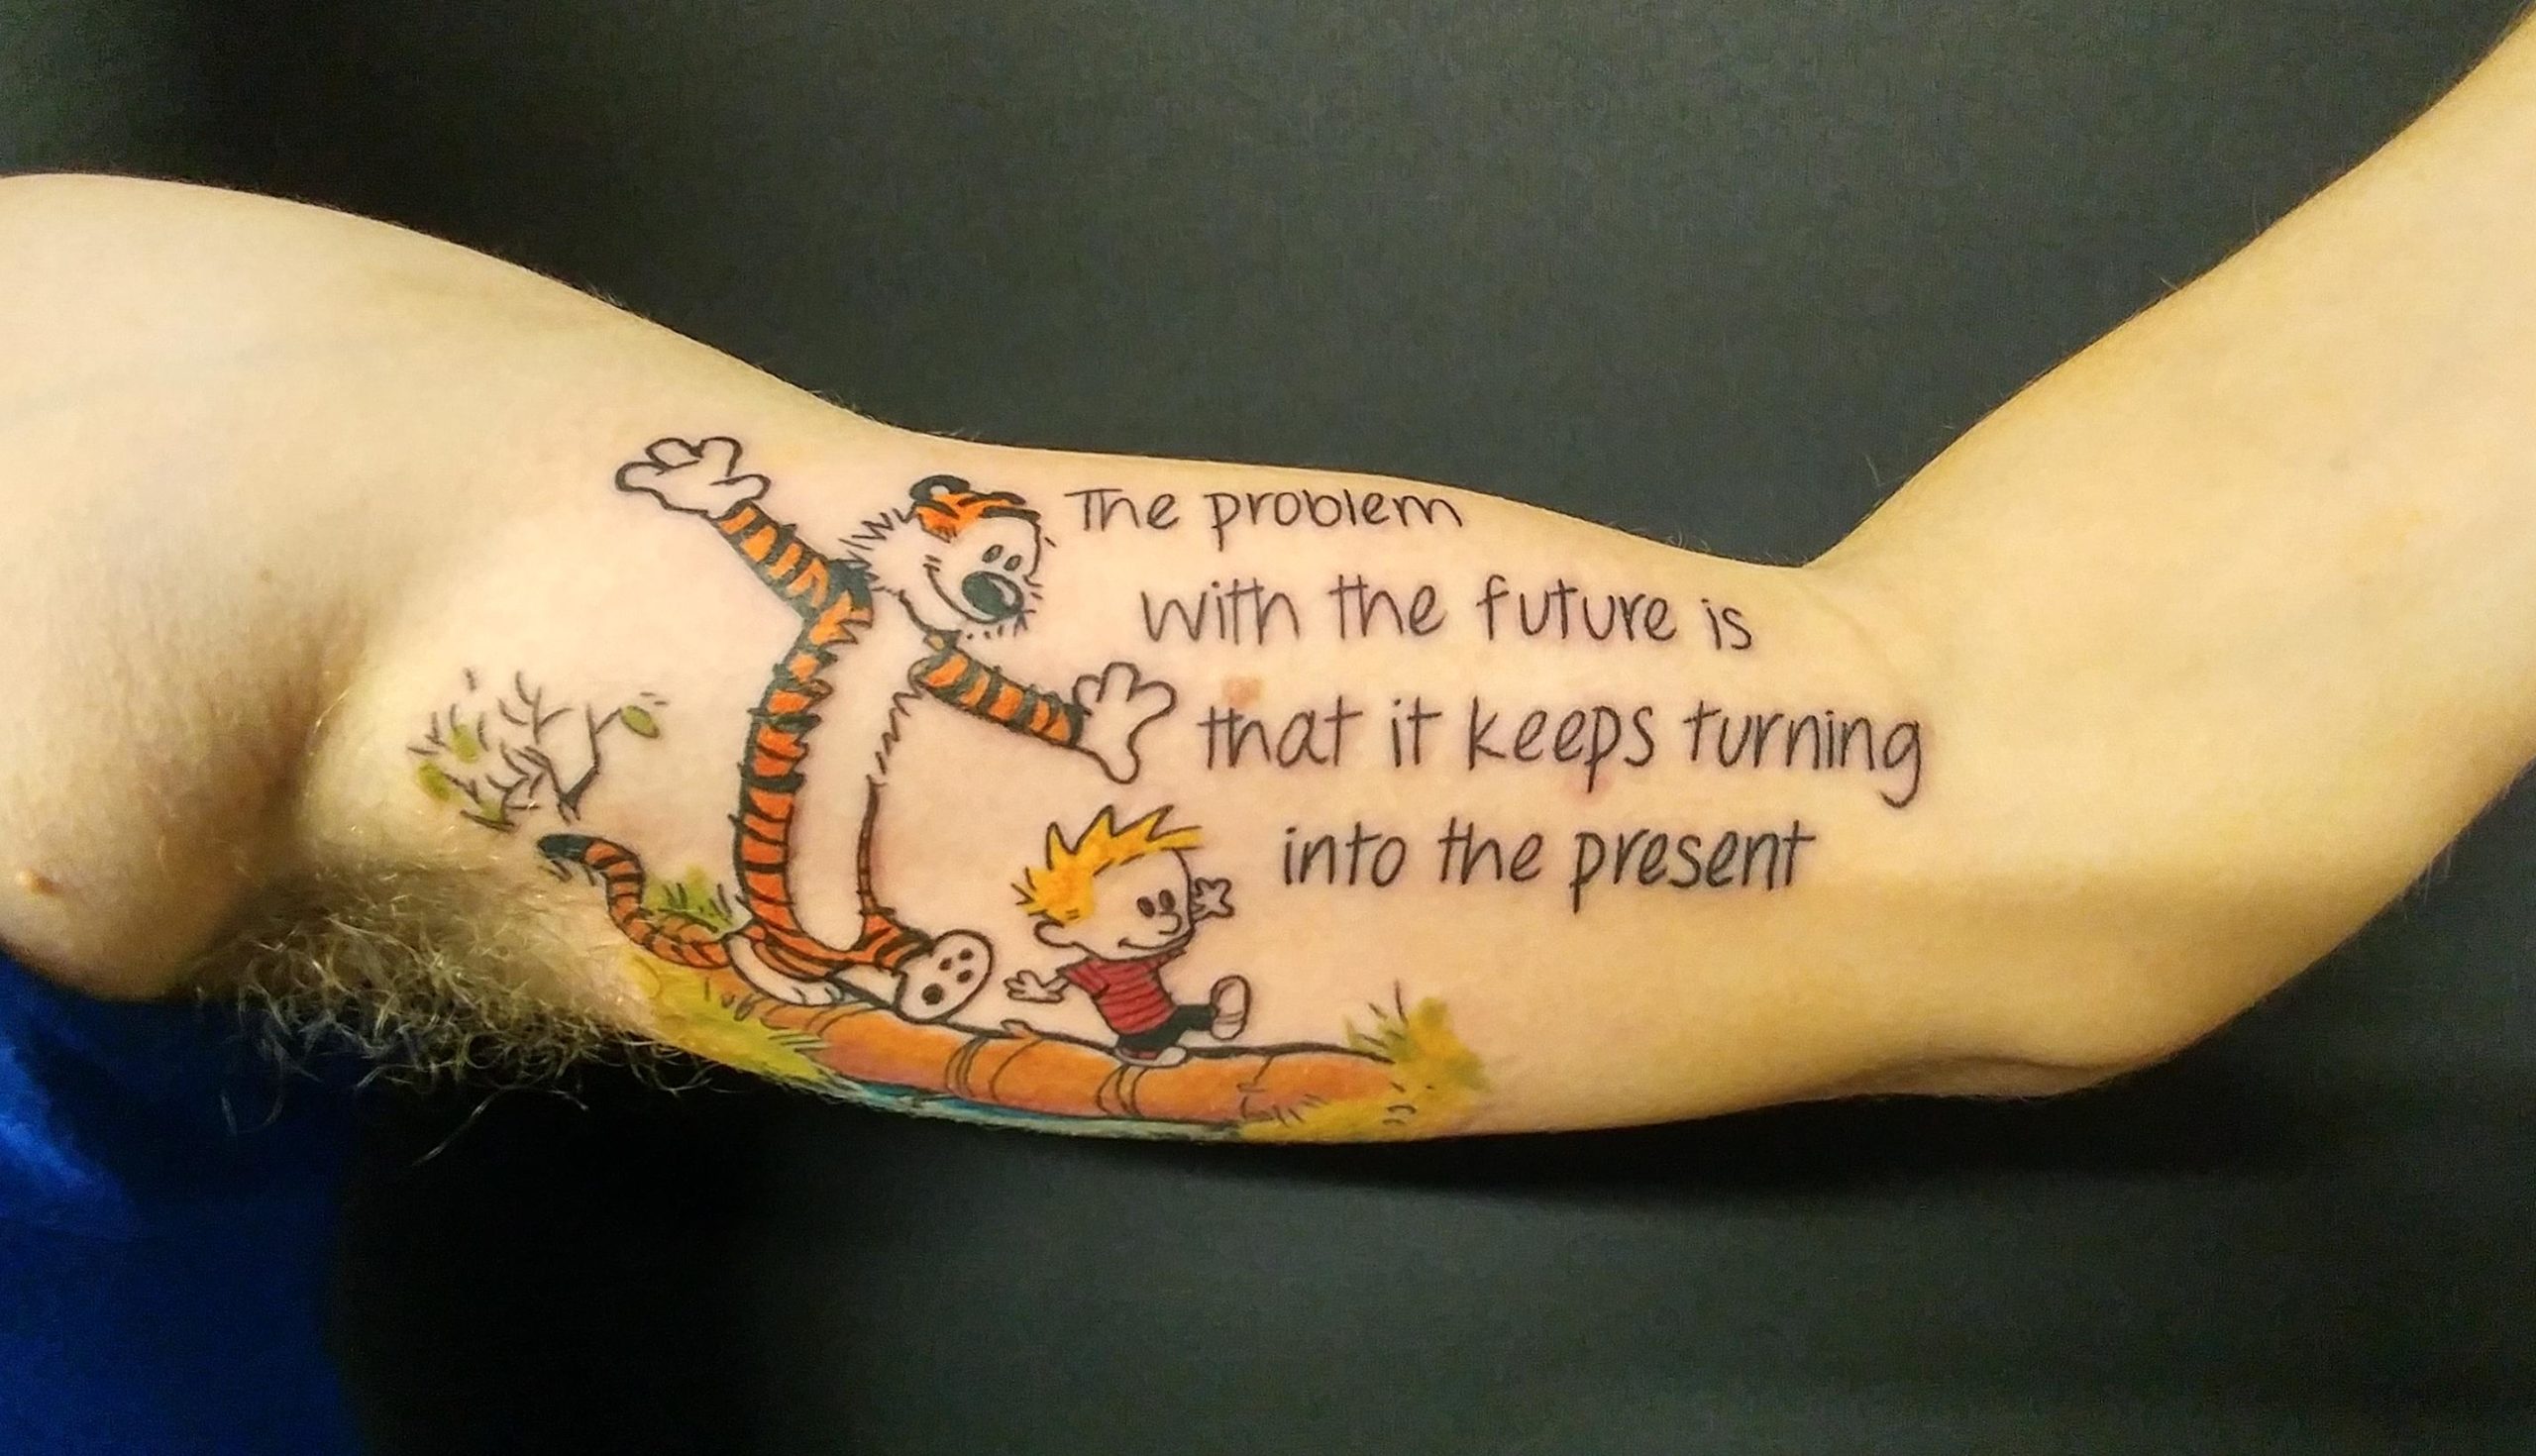 101 Amazing Calvin and Hobbes Tattoo Designs You Need To See! - Outsons